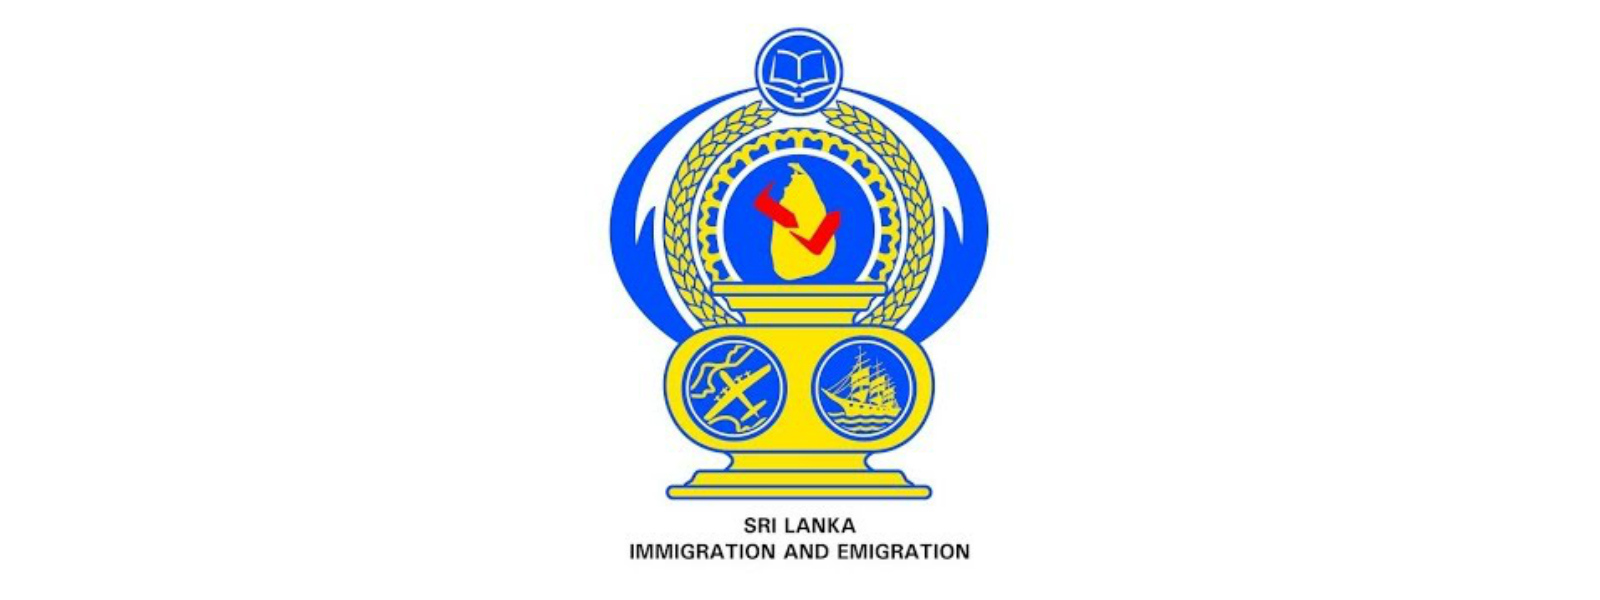 Validity period of visas issued to foreigners extended